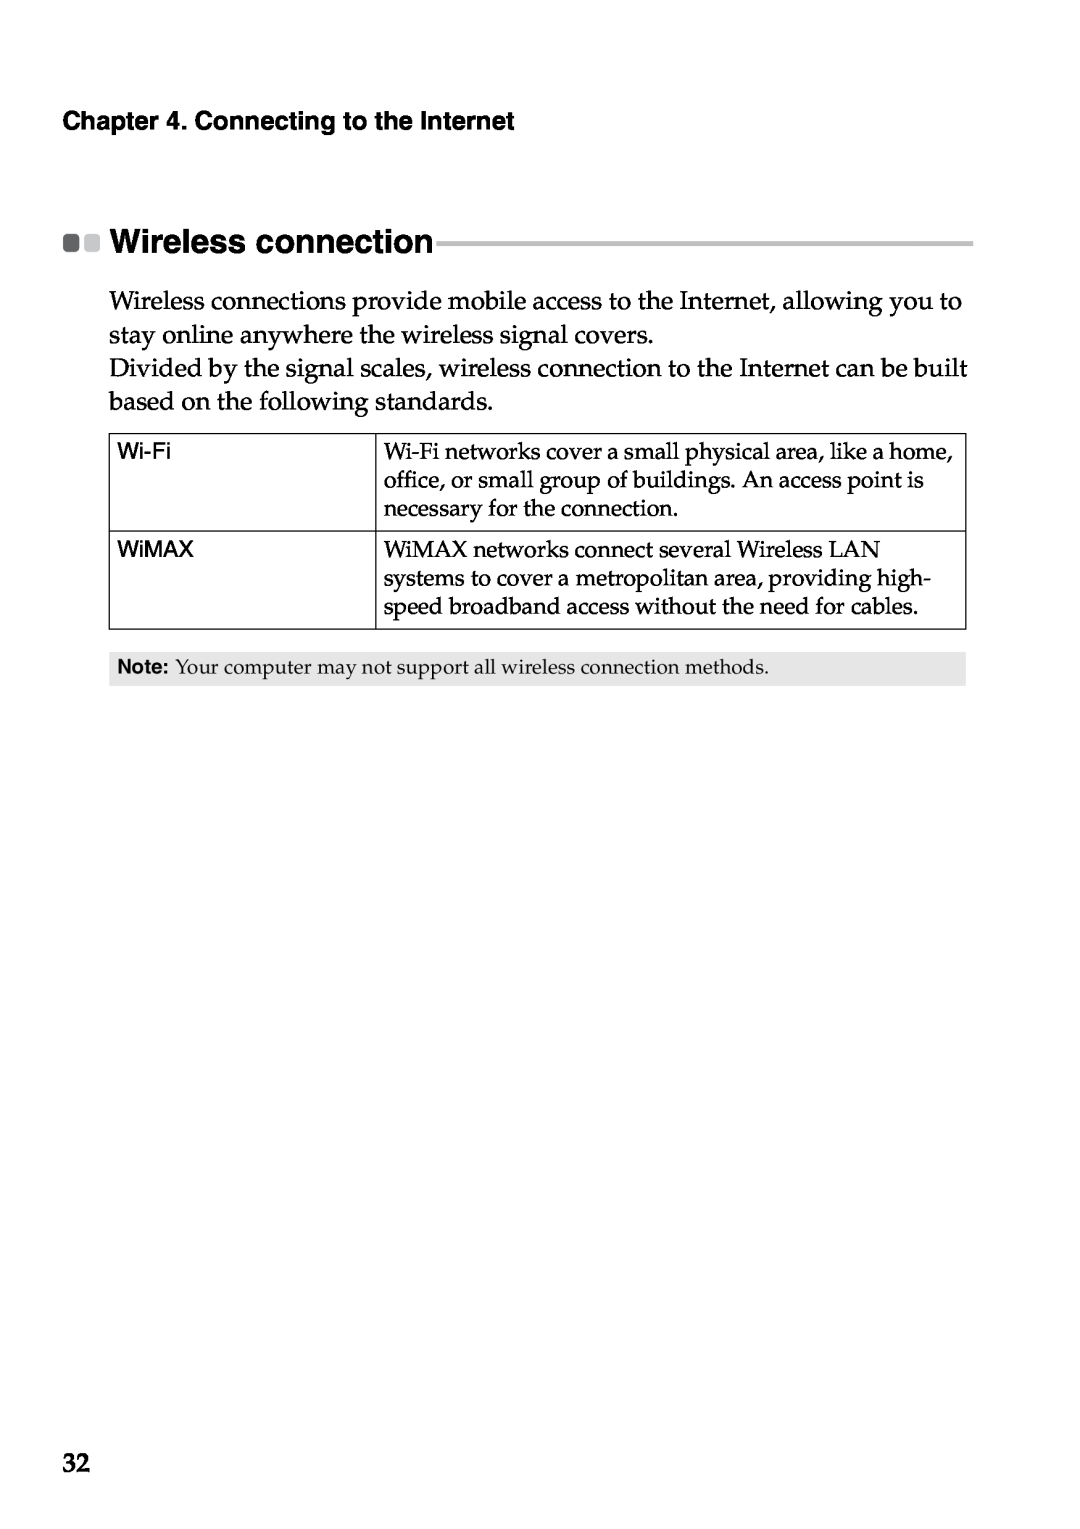 Lenovo U310, U410 manual Wireless connection, Connecting to the Internet, Wi-Fi WiMAX 